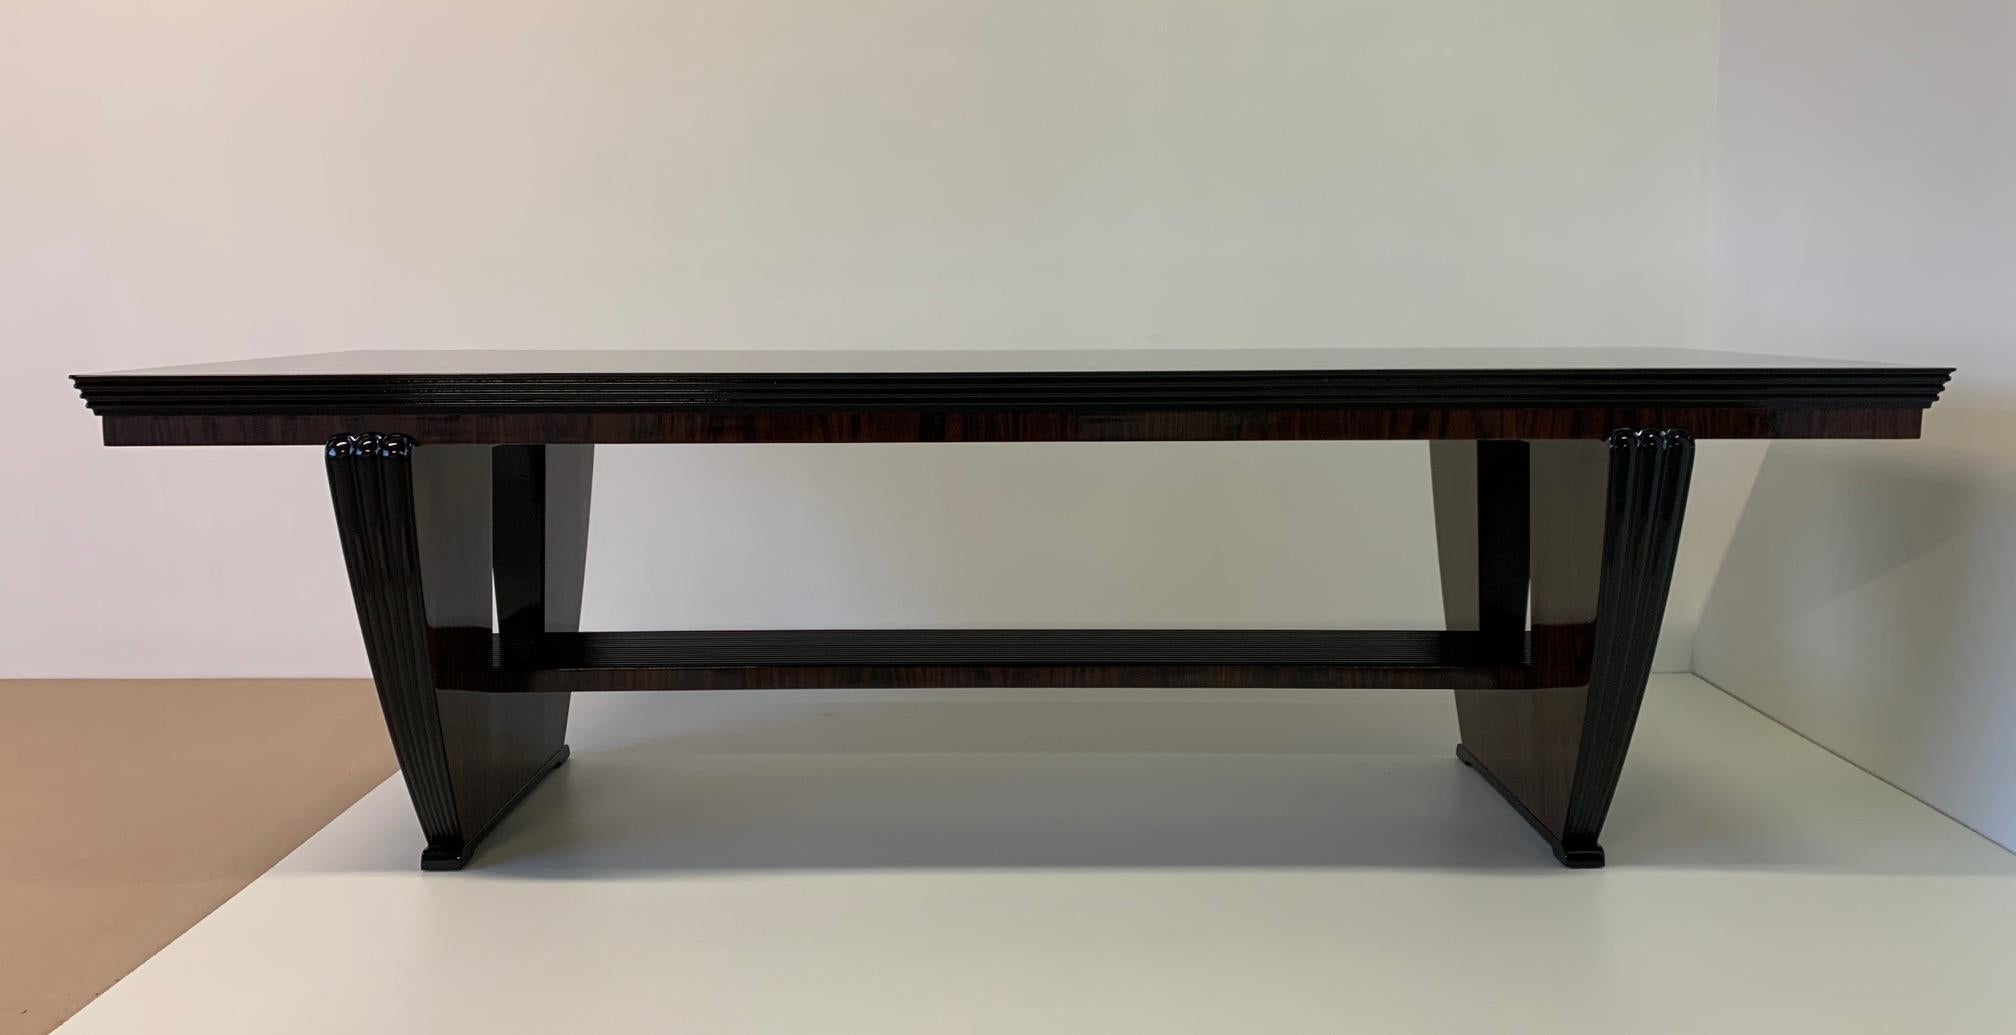 Elegant Art Deco table in fine exotic wood with ebonized details from the 1940s made in Italy.
Completely restored.